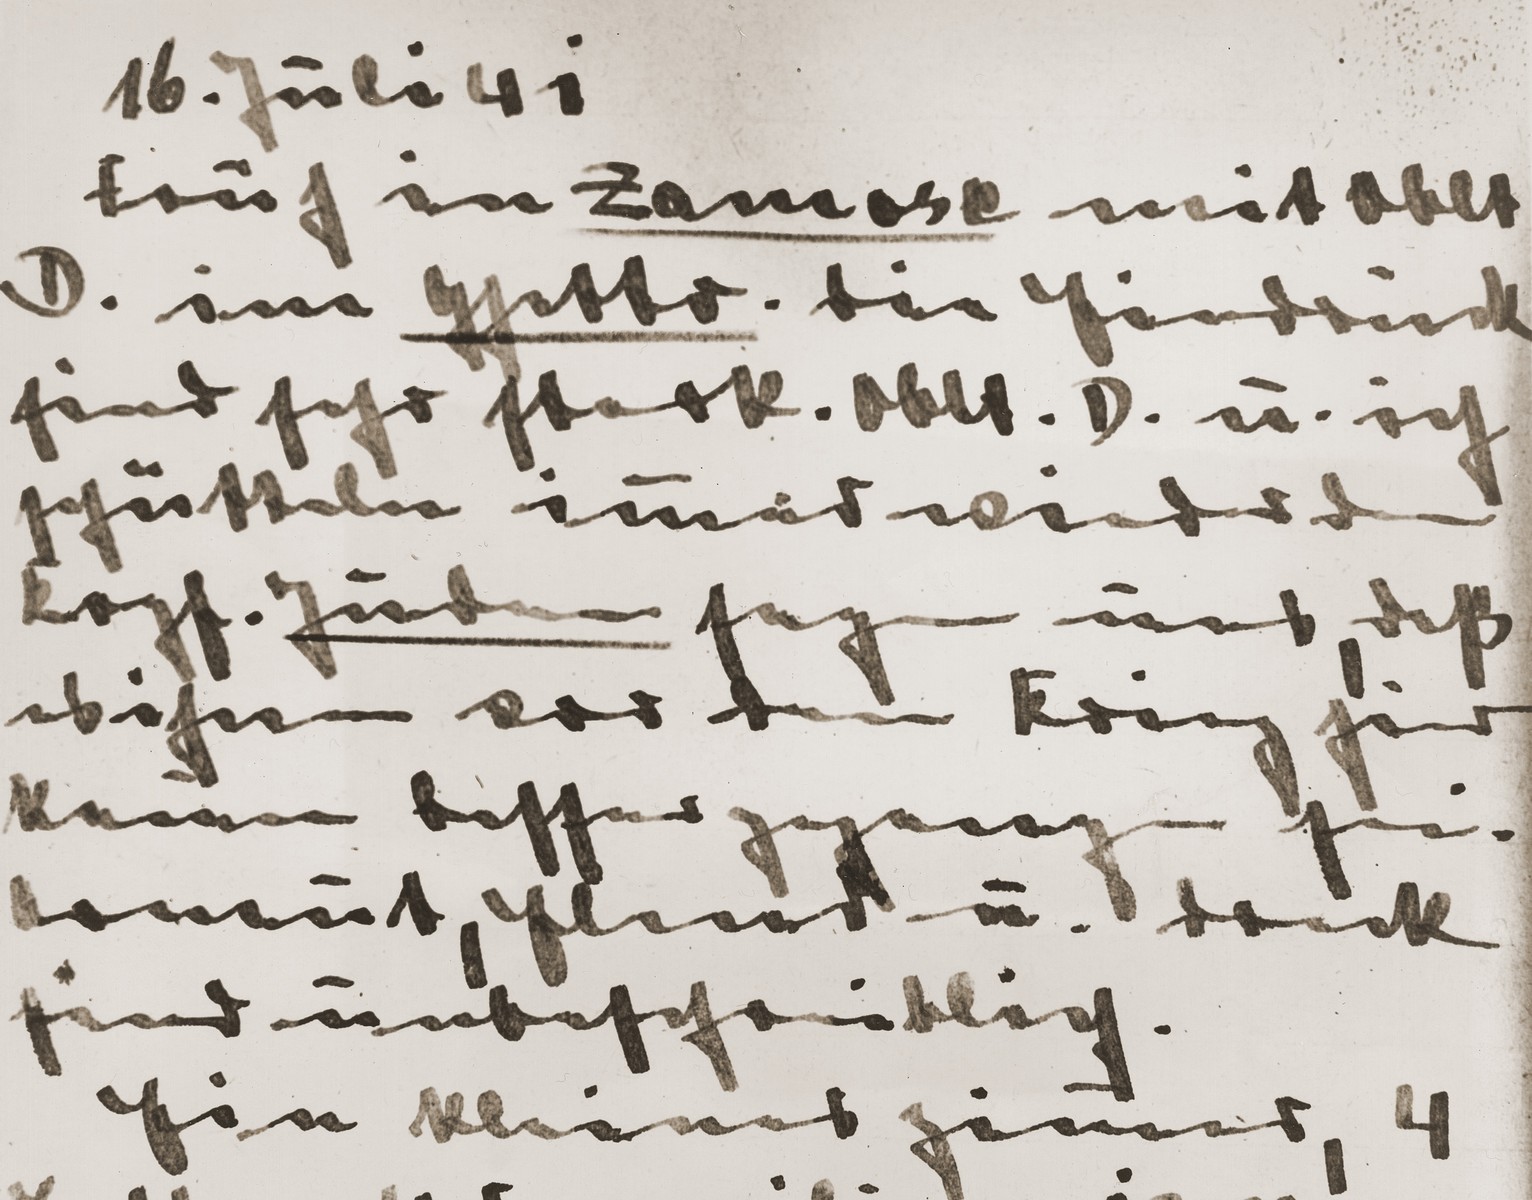 Diary entry for July 16, 1941, written by Lothar Streicher, son of Der Stuermer publisher, Julius Streicher.

The excerpt reads: "Went early [today] to Zamosc [ghetto] with Lt. D.  The impressions were very strong.  Lt. D. and I kept shaking our heads.  Jews tell us that it was scarcely better for them before the war.  The poverty, suffering, and filth are indescribable.  A small room, 4 . . . "

Images of Lothar Streicher's diary entries were made available by the International News Service in October, 1945, and were used to illustrate a series of articles about Julius Streicher, a defendant at the International Military Tribunal war crimes trial in Nuremberg.  The original INS caption reads: "This page from the diary of Julius Streicher's son, Lothar, records the youth's reactions during a visit to a Jewish ghetto:  'There is only one solution to the Jewish Problem . . . extermination!'"

Lothar Streicher joined the SS while still at school.  At the beginning of WWI he joined the Luftwaffe and trained as a pilot.  On the side, Lothar undertook special missions for his father to gather information about anti-Nazi activities.